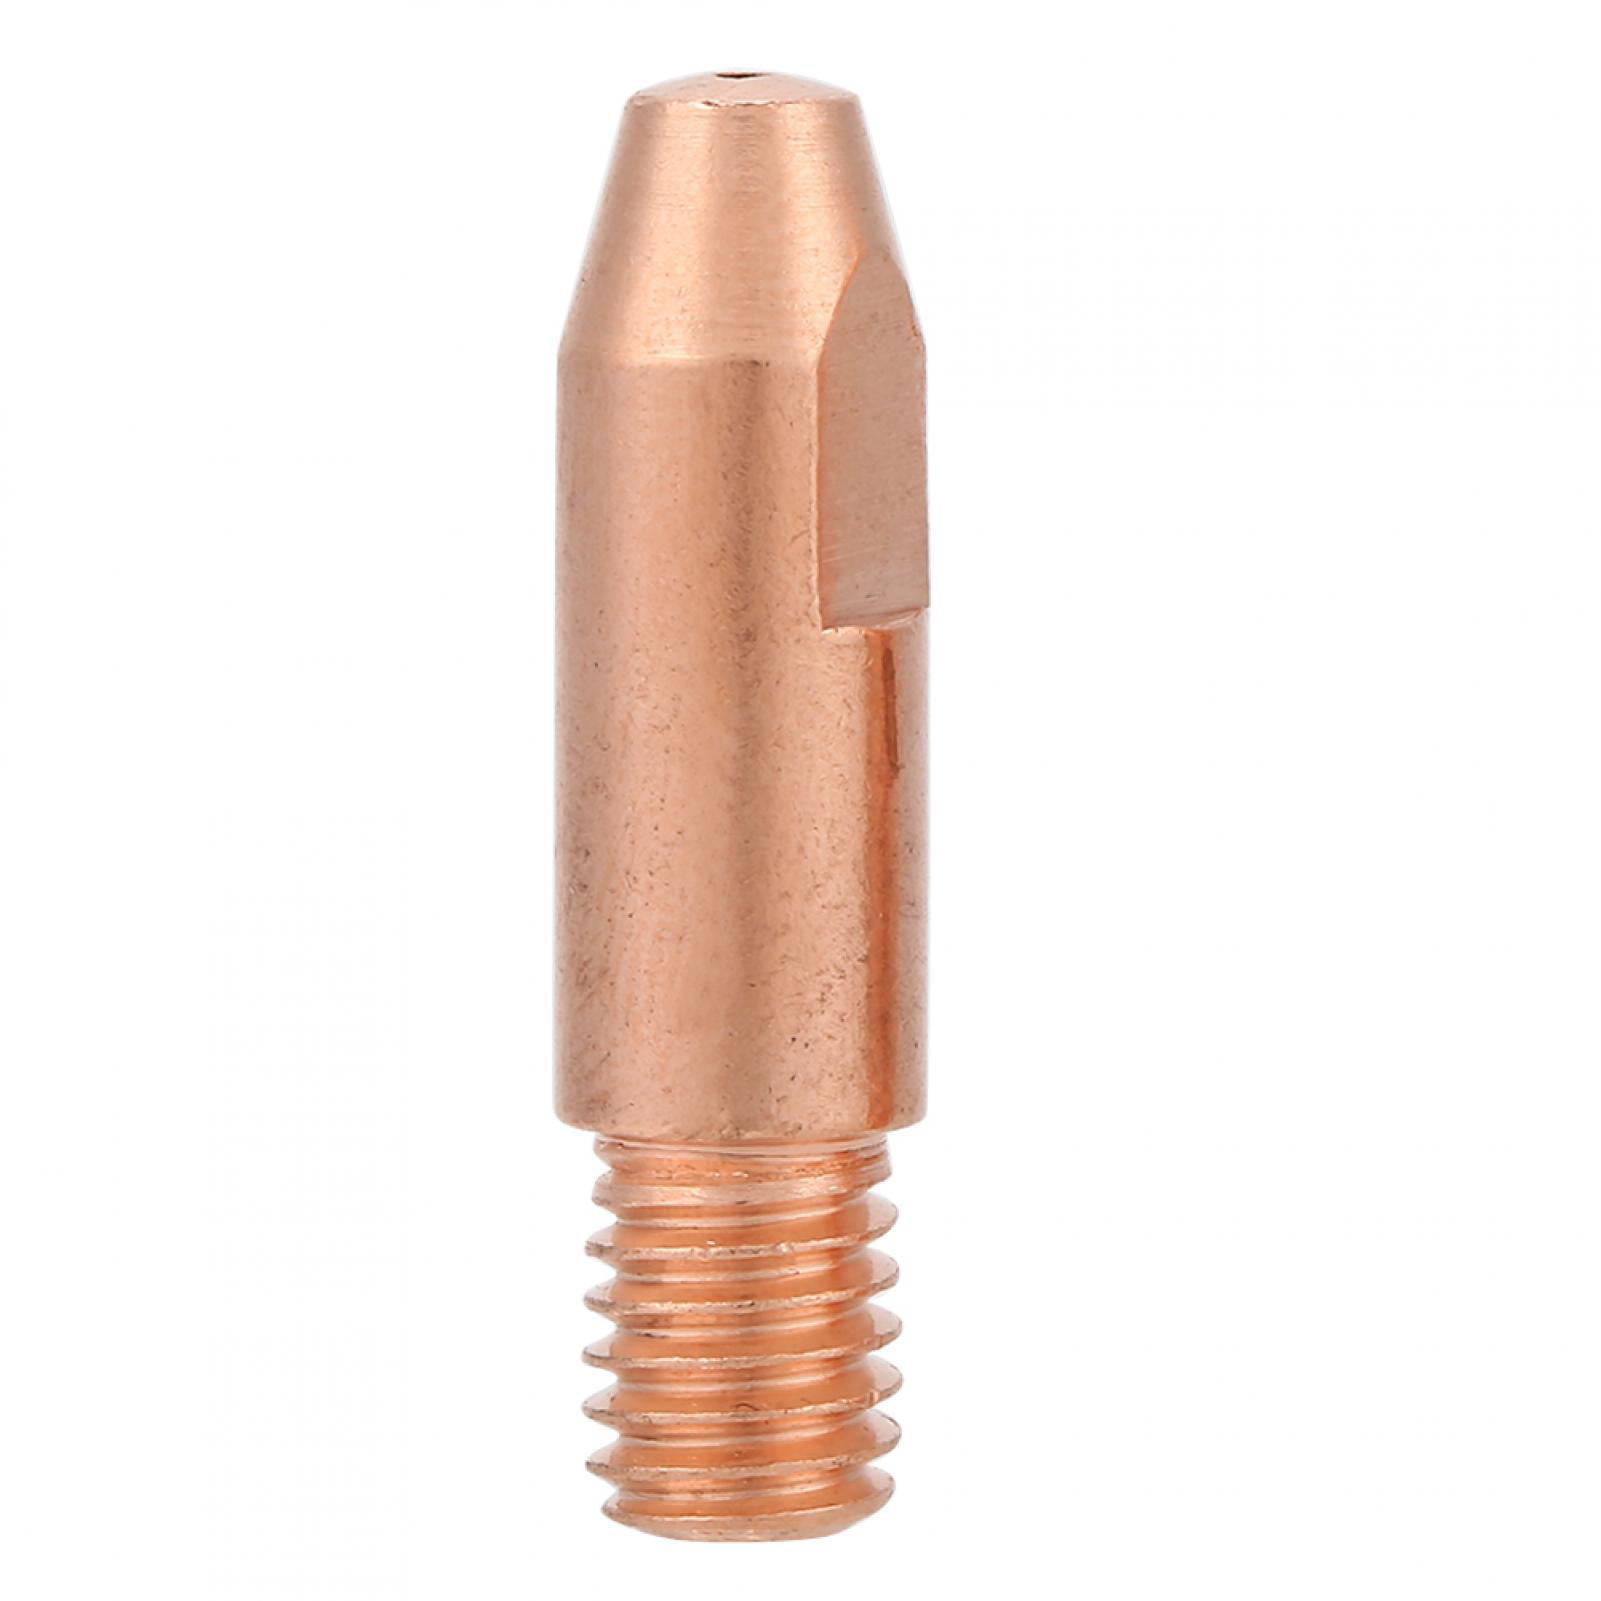 Contact Tip Sturdy Corrosion for MAG Welding Torch Factory Miller Home 20Pcs Brand New High Temperature Welding Torch Contact Tip 1.2 